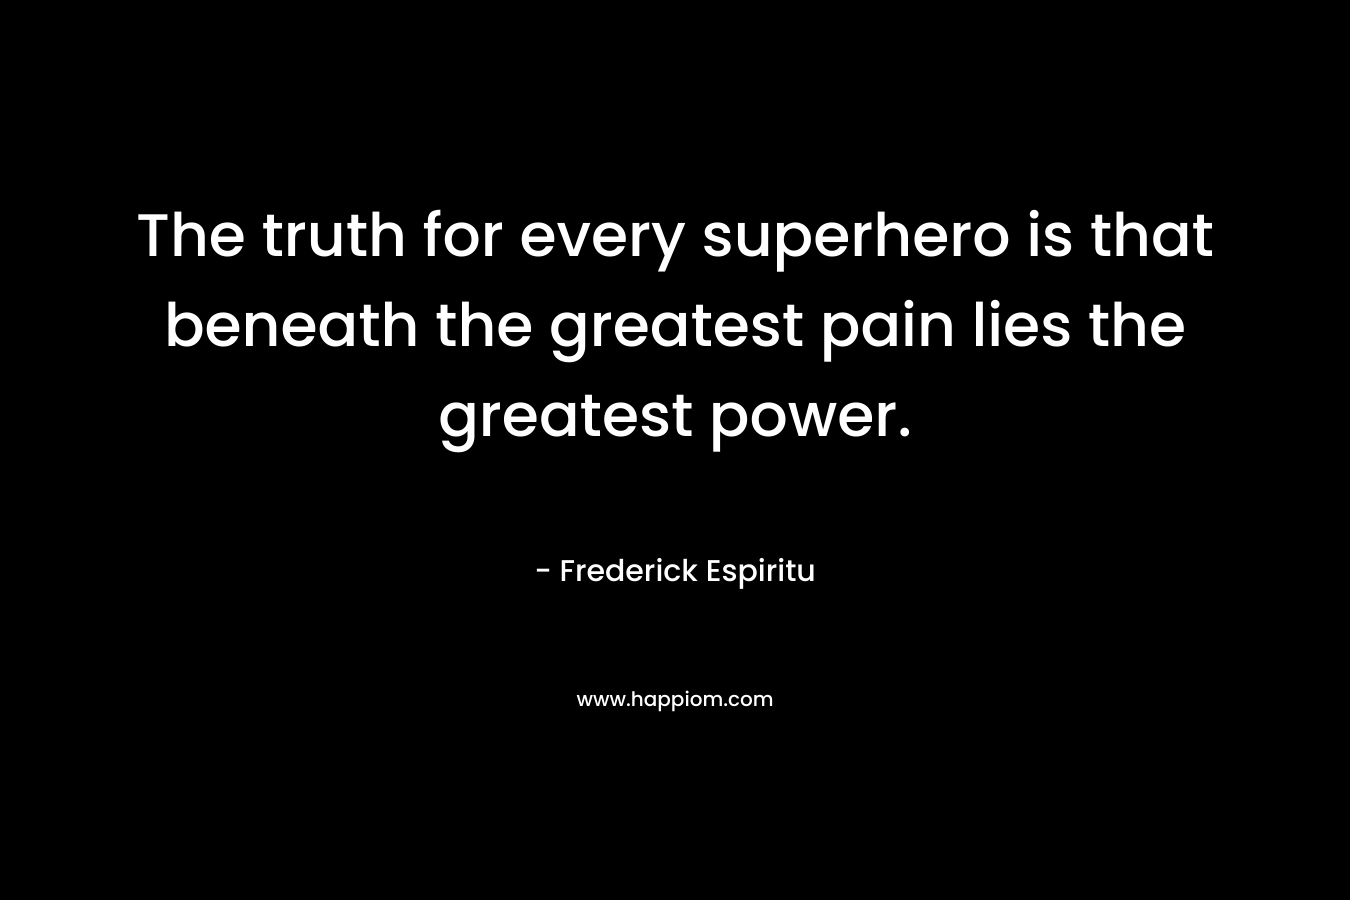 The truth for every superhero is that beneath the greatest pain lies the greatest power.